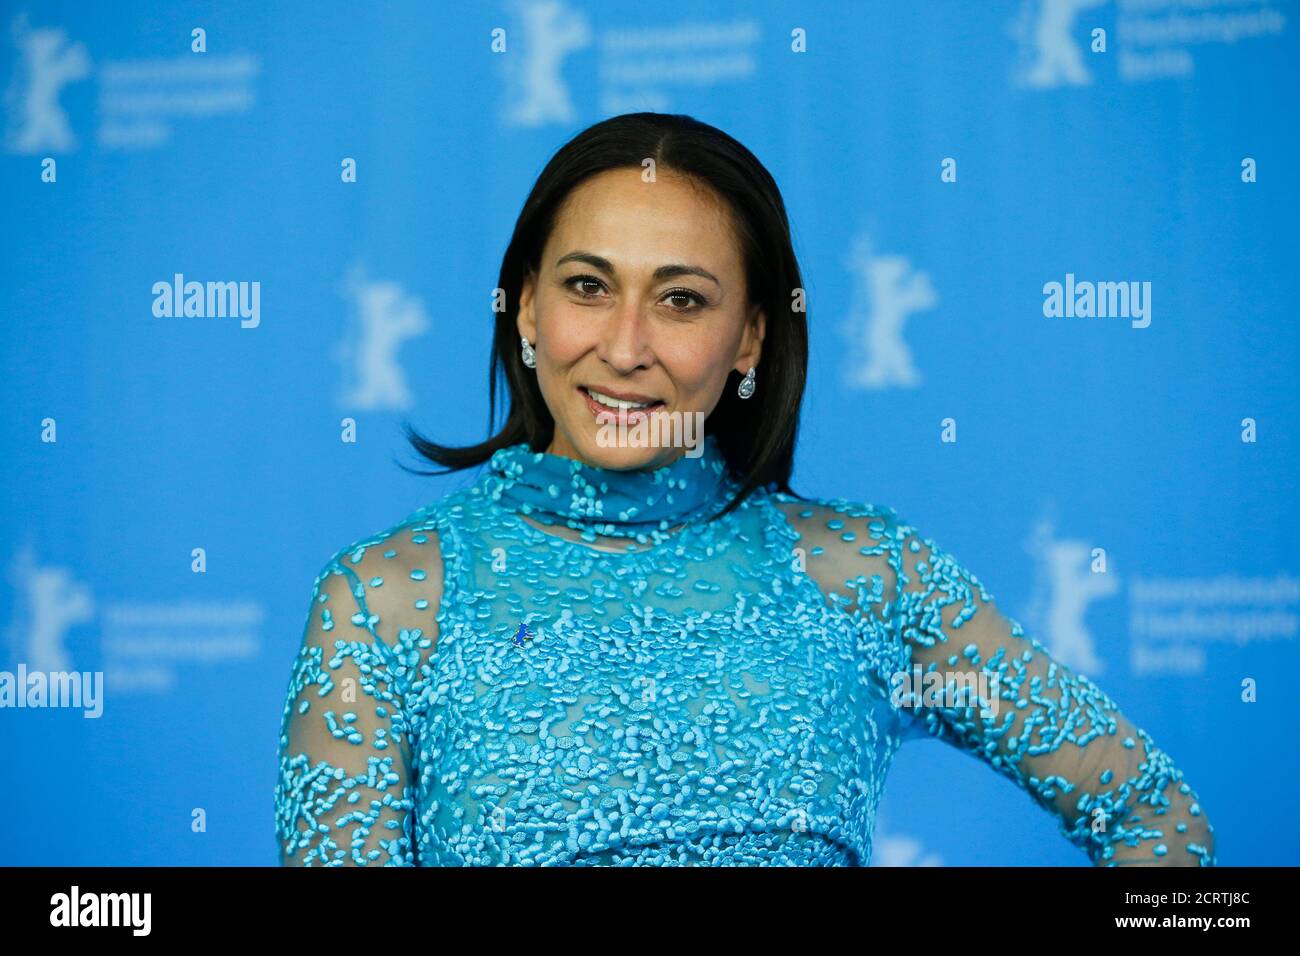 Actress Cherie Gil poses to promote the movie 'A lullaby to the sorrowful mystery' at the 66th Berlinale International Film Festival in Berlin, Germany, February 18, 2016.     REUTERS/Fabrizio Bensch Stock Photo